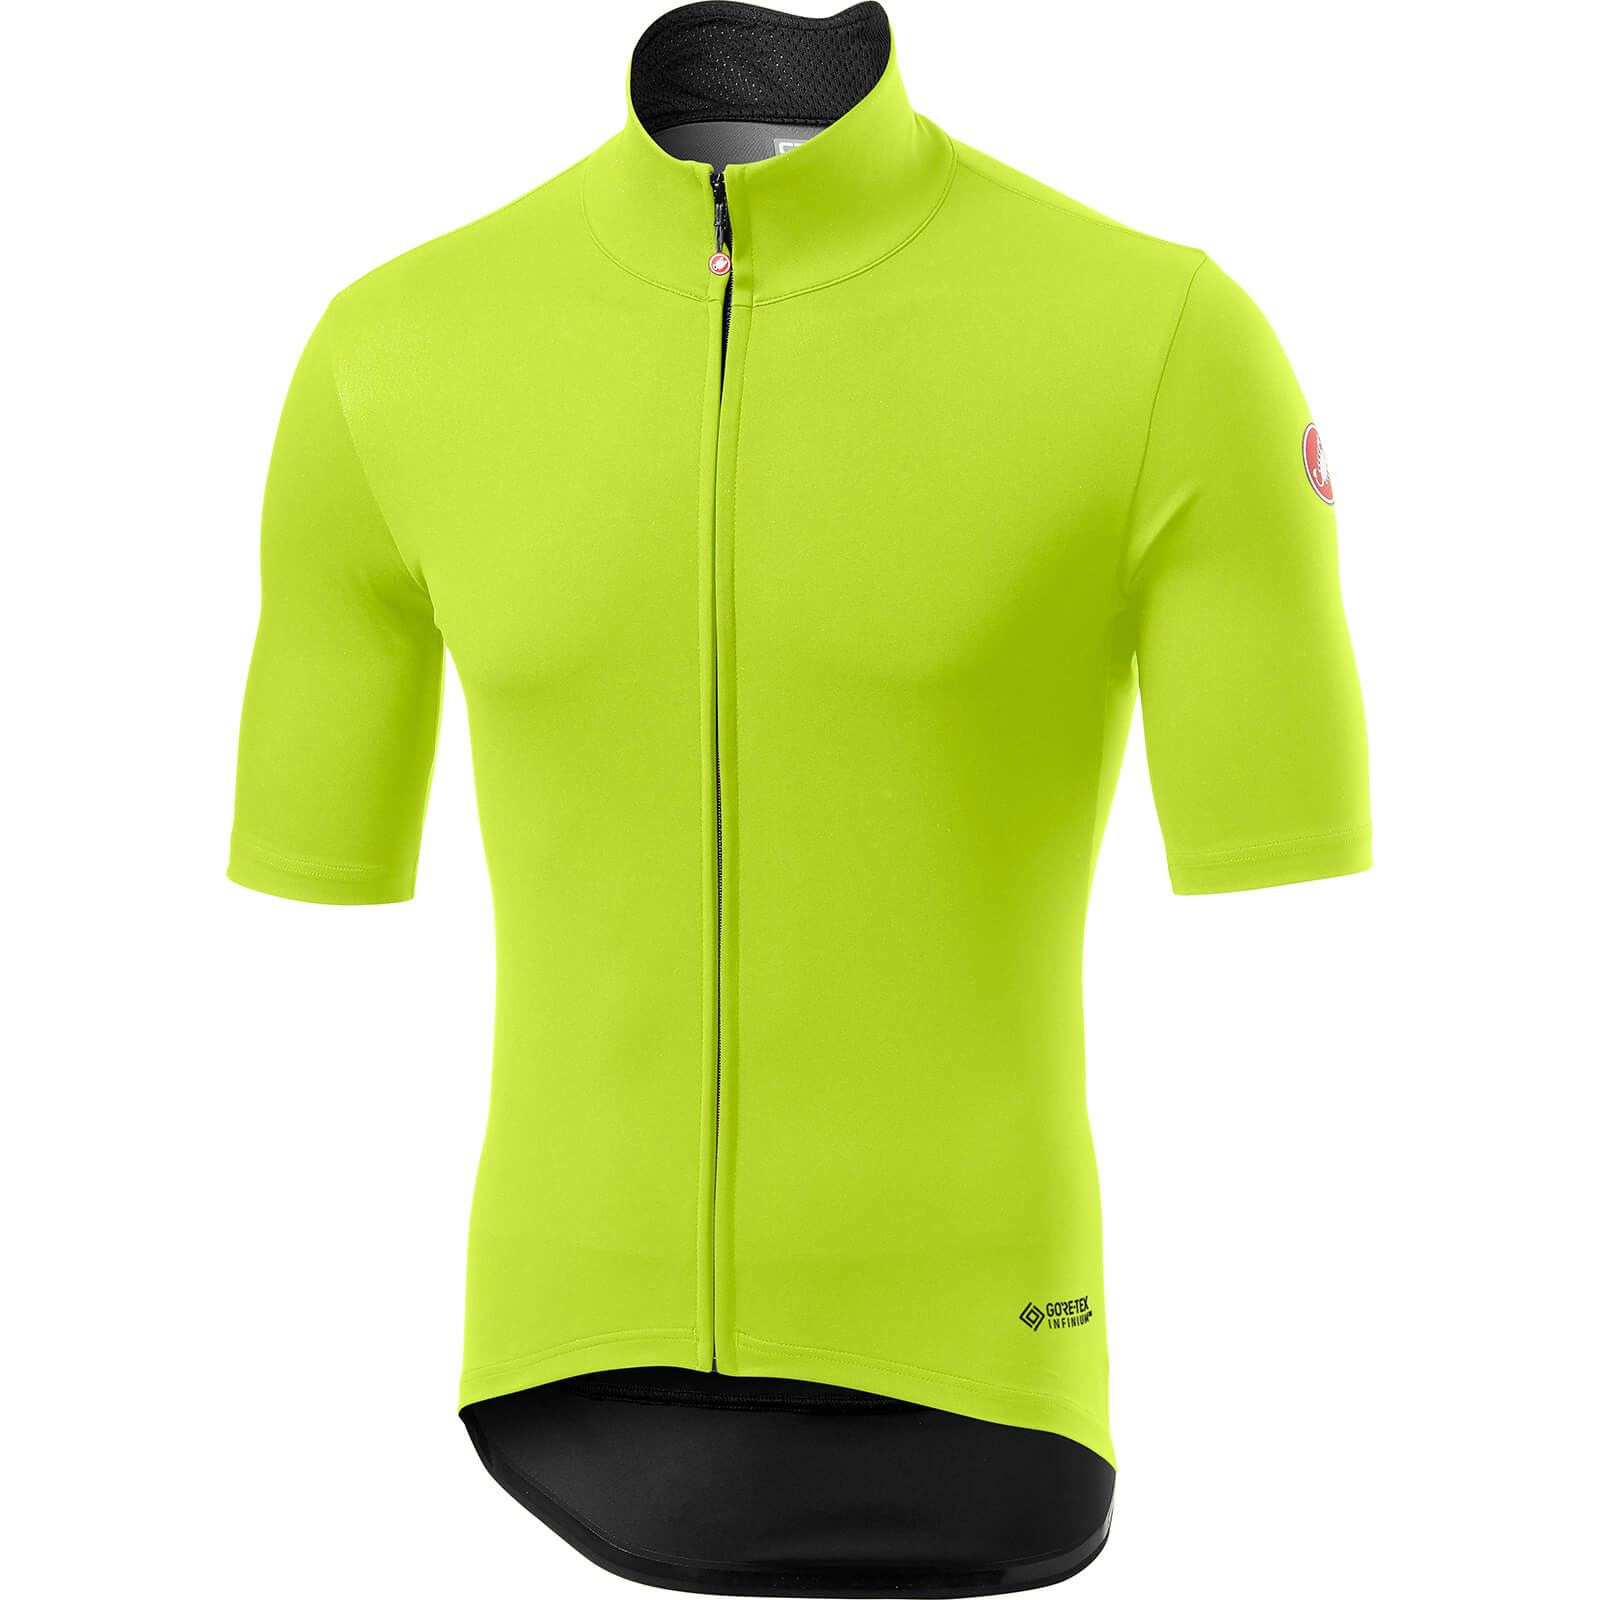 Castelli Perfetto RoS Light Jersey - XL - Yellow Fluo